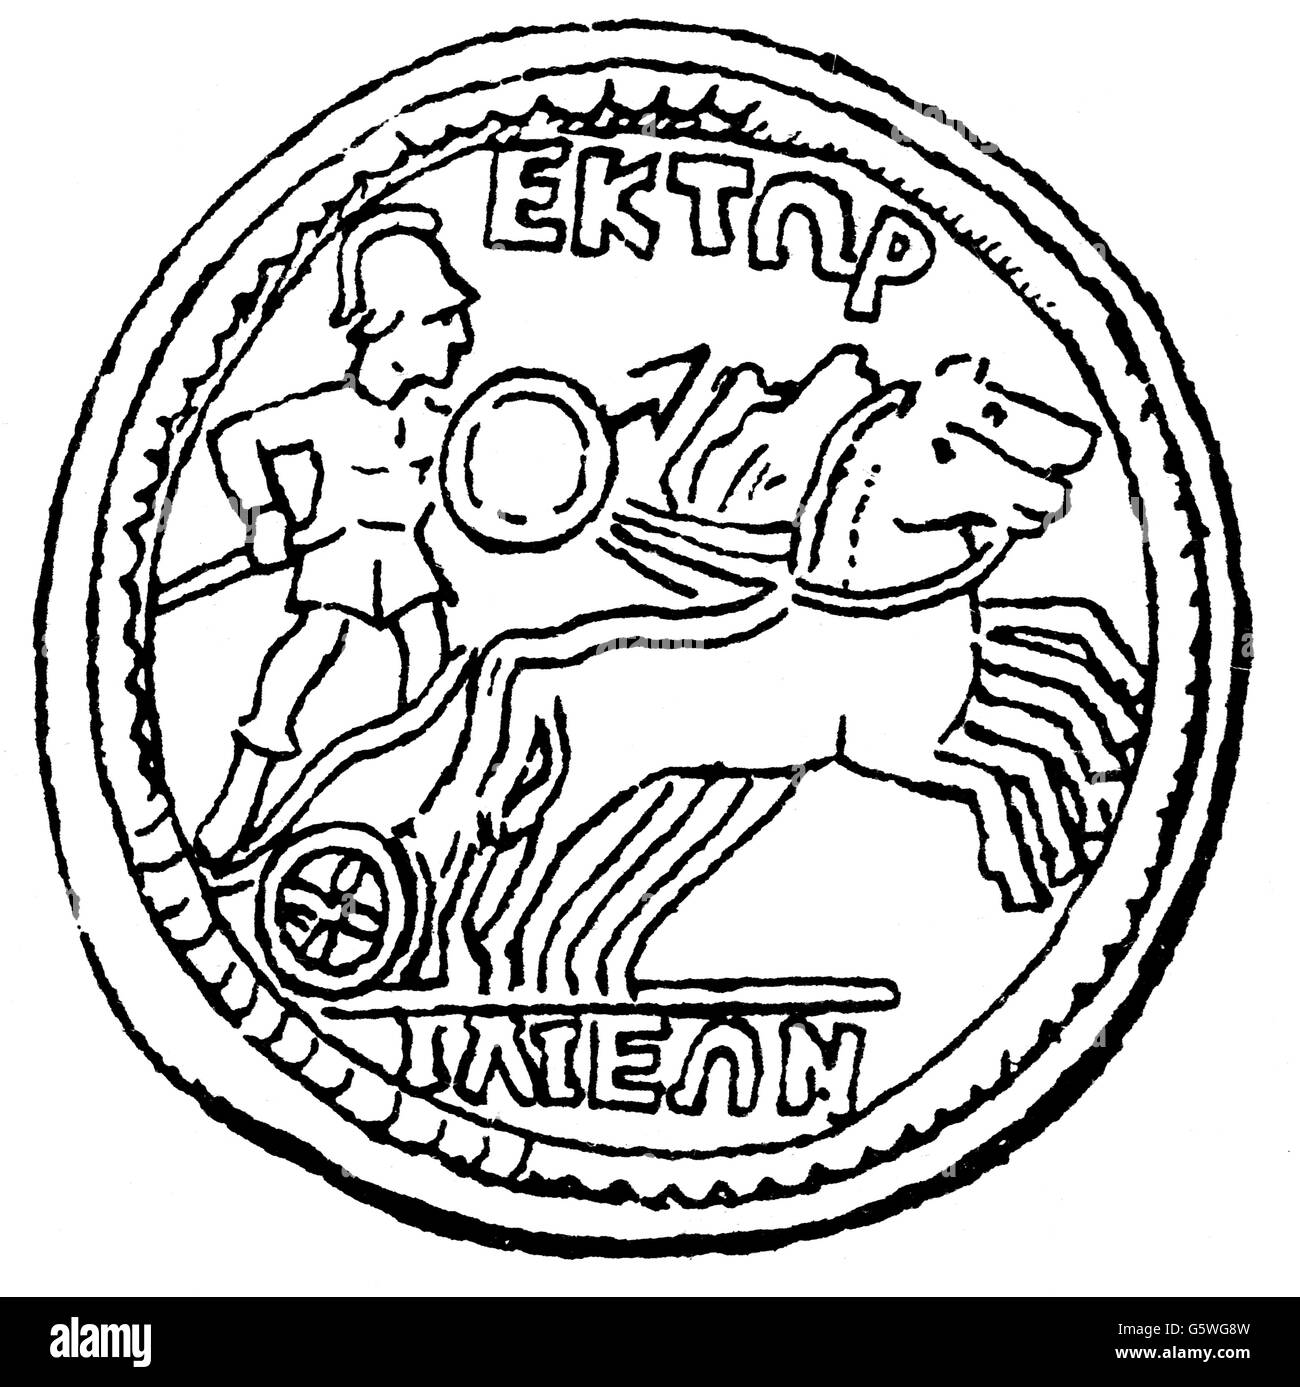 money / finances, coins, ancient world, Greece, coin with the picture of Hector on the chariot, Troy, wood engraving, ancient world, ancient times, Greek, Grecian, numismatics, Trojan war, Iliad, mythology, hero, heroes, horse, horses, chariot, inscription, epigraphs, inscriptions, coin, coins, historic, historical, people, ancient world, Additional-Rights-Clearences-Not Available Stock Photo